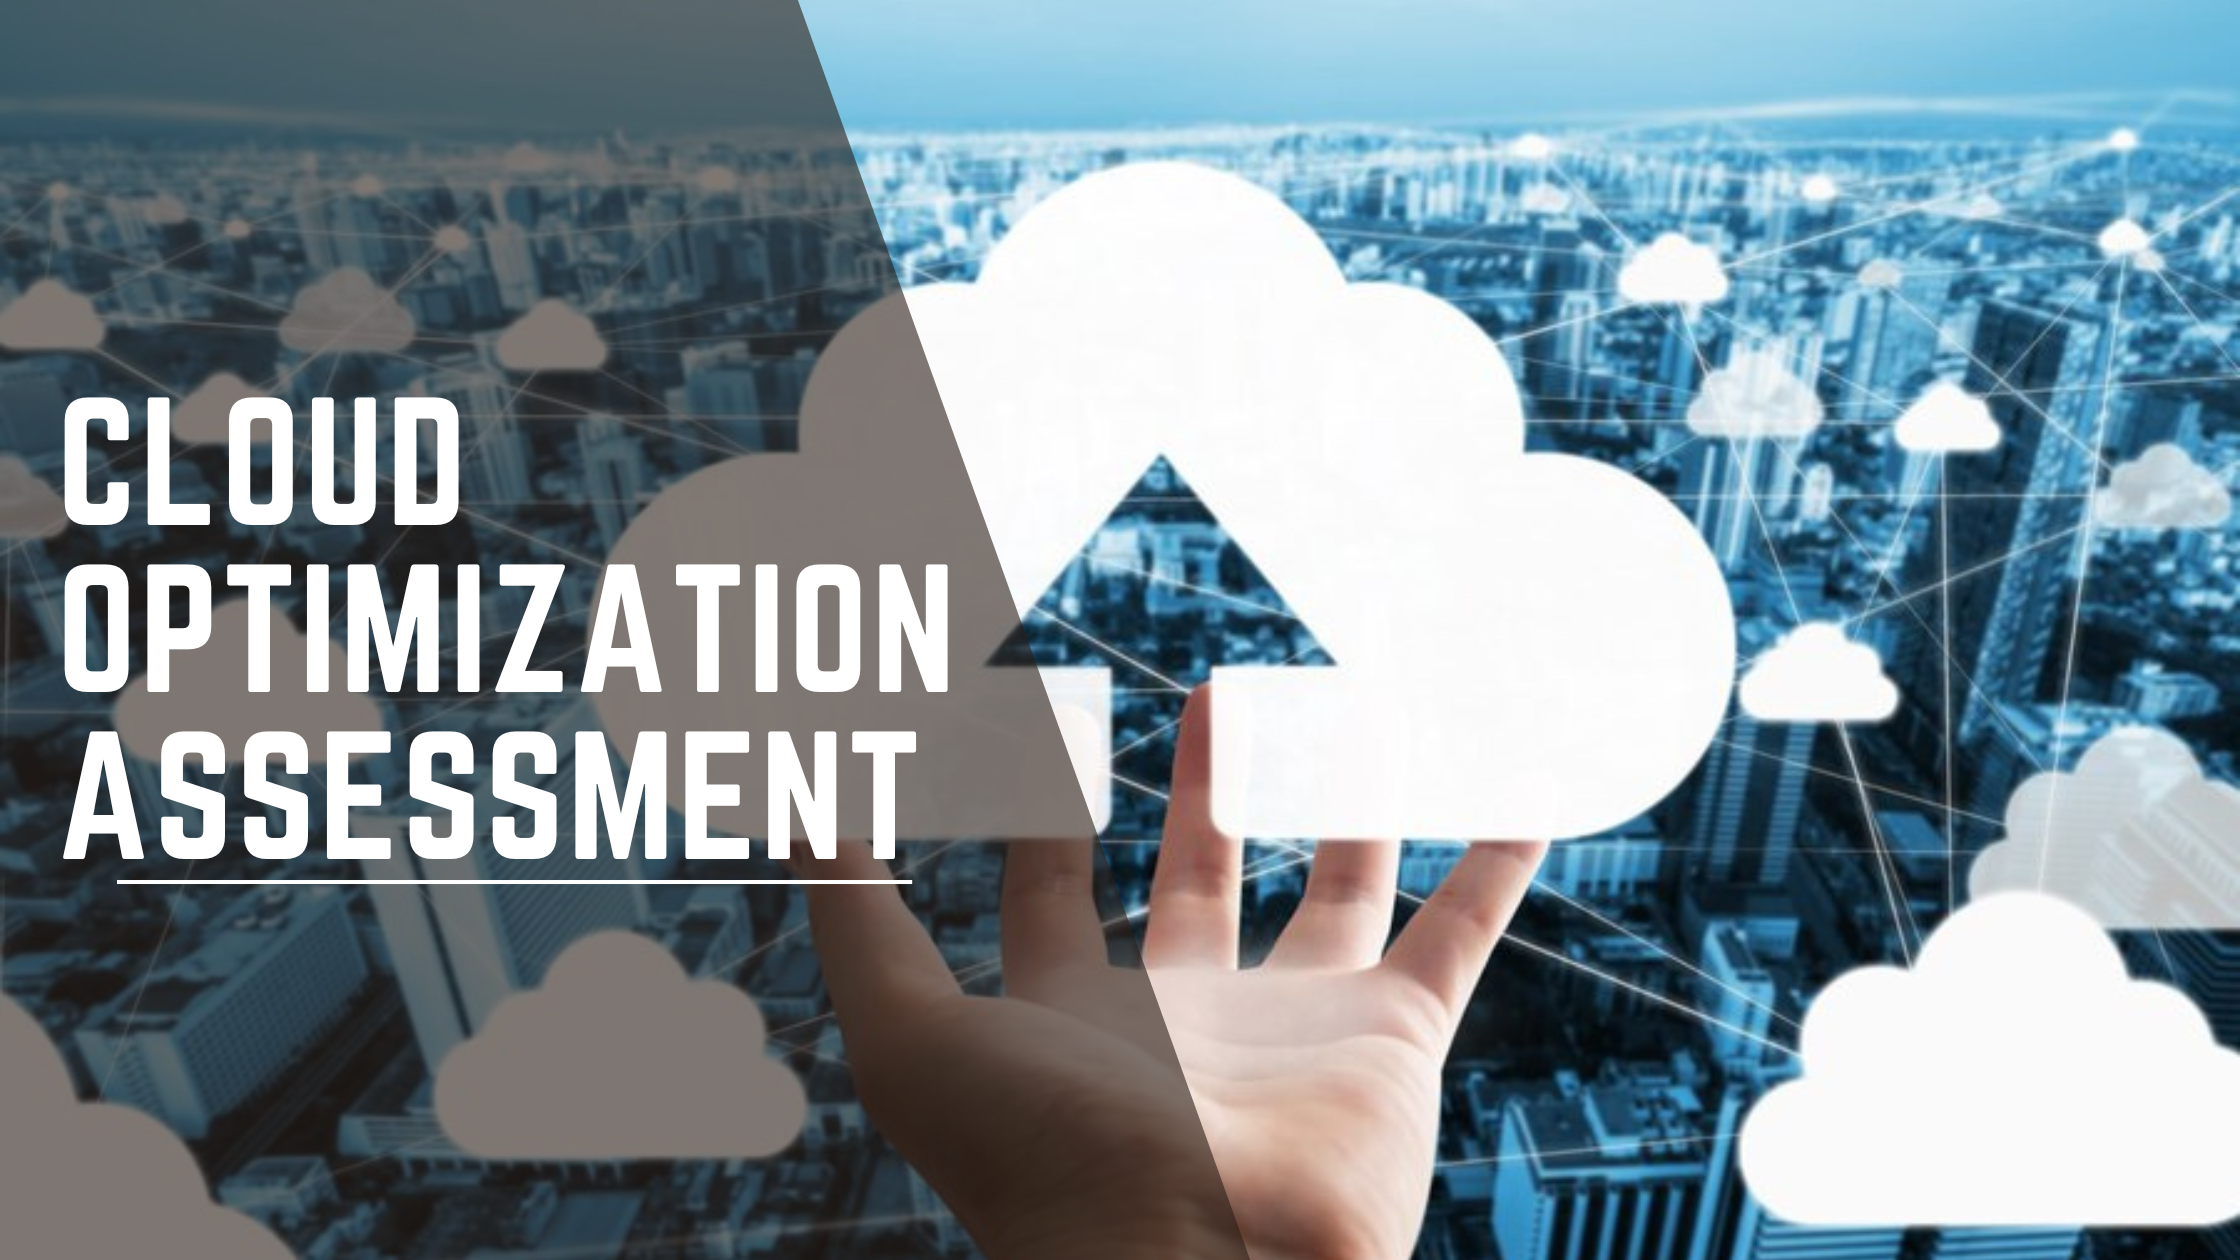 Cloud Optimization Assessment transforms business efficiency - learn from leading companies. 